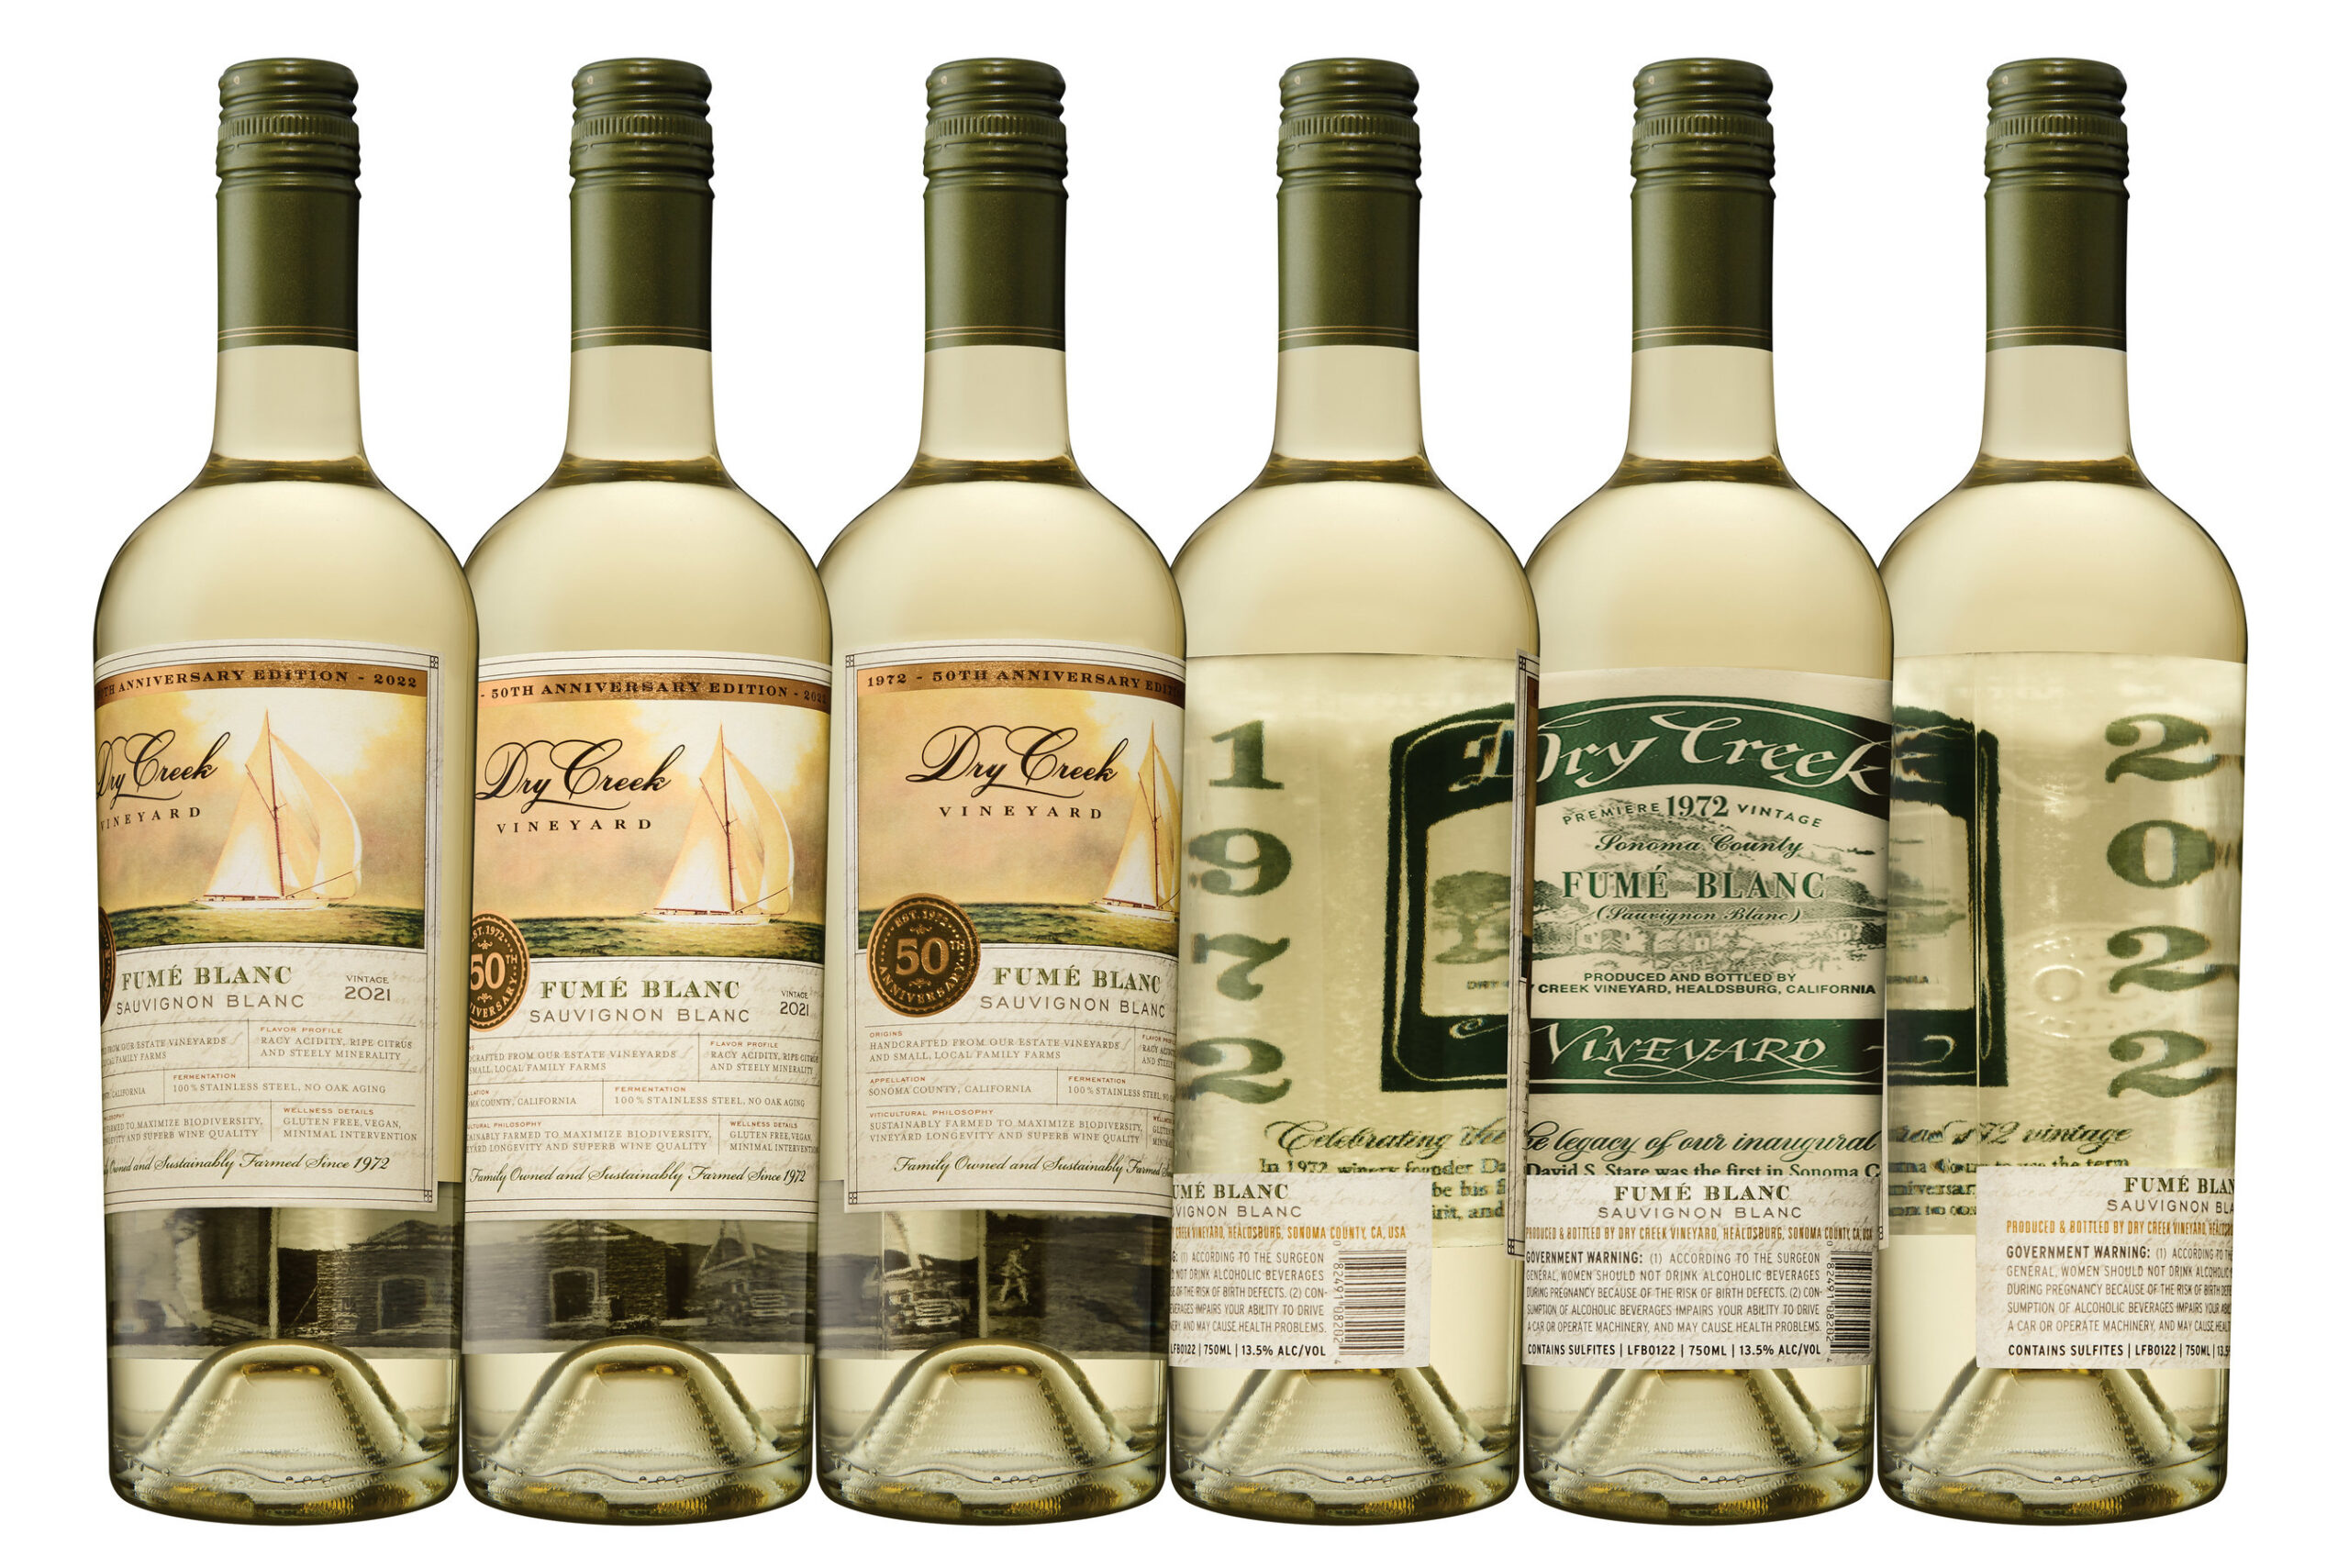 DRY CREEK VINEYARD RELEASES 50TH ANNIVERSARY EDITION OF FUMÉ BLANC